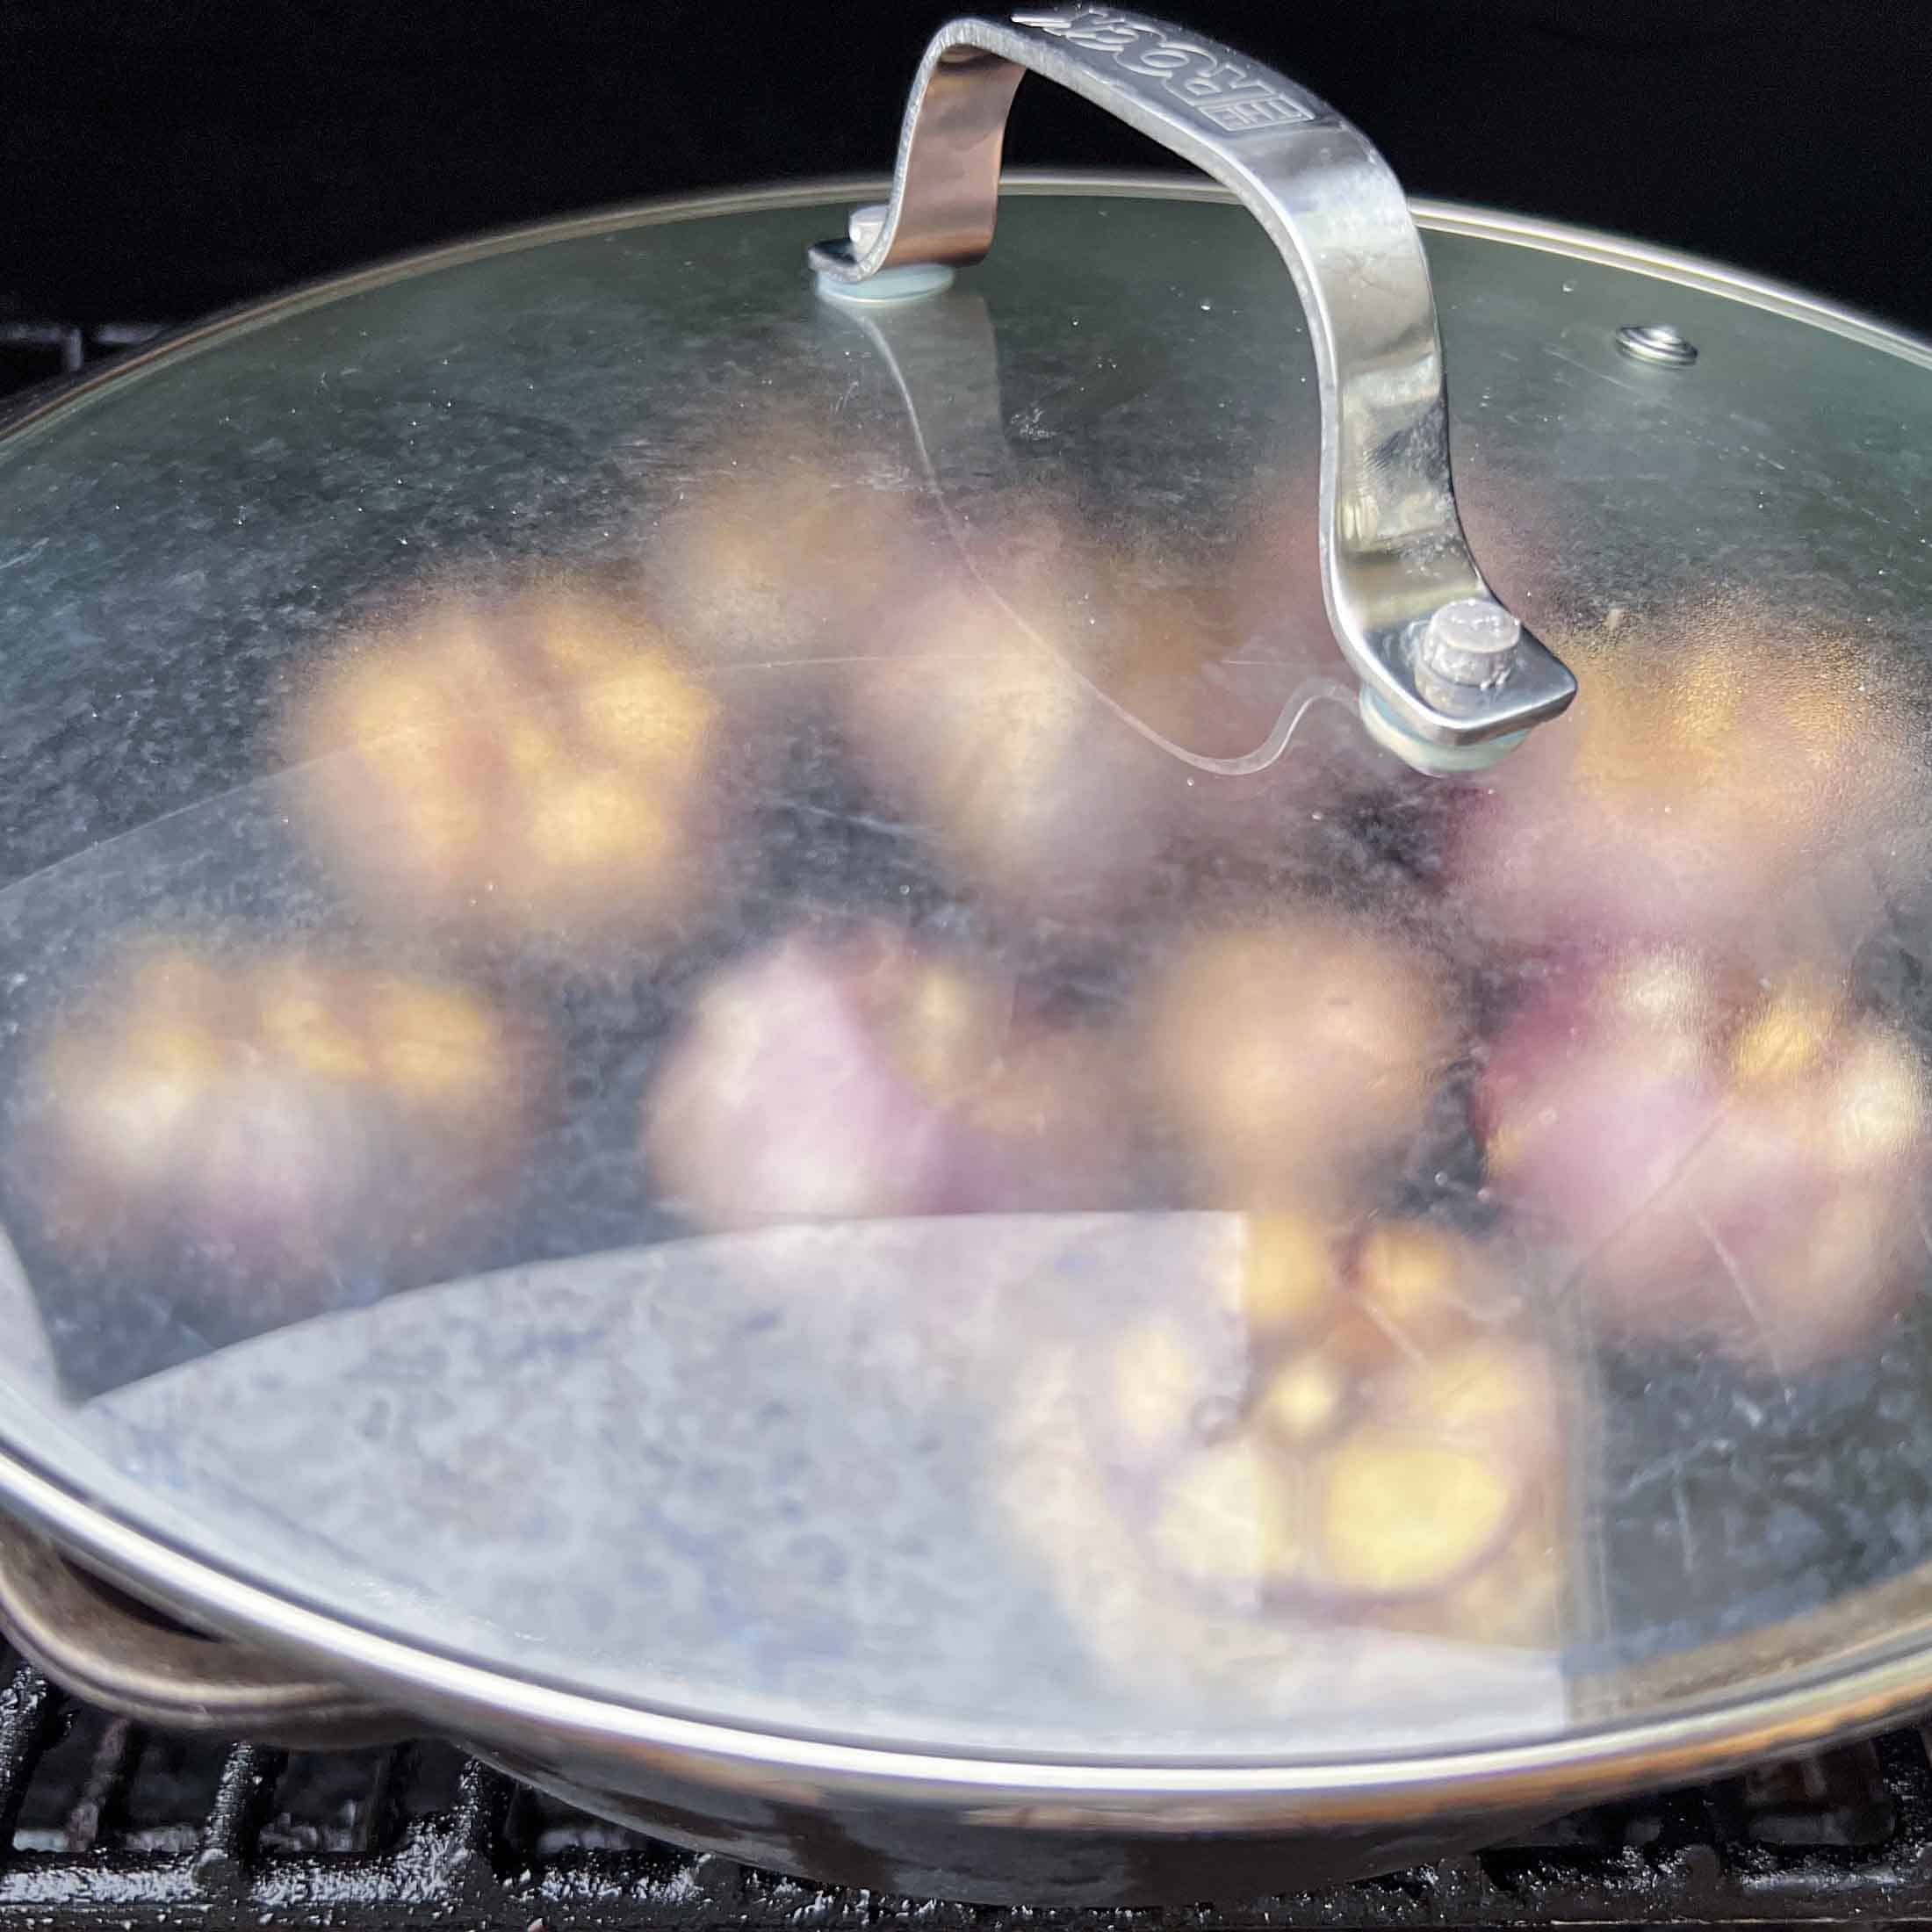 Garlic in a cast iron pan covered by a glass lid on a pellet grill.